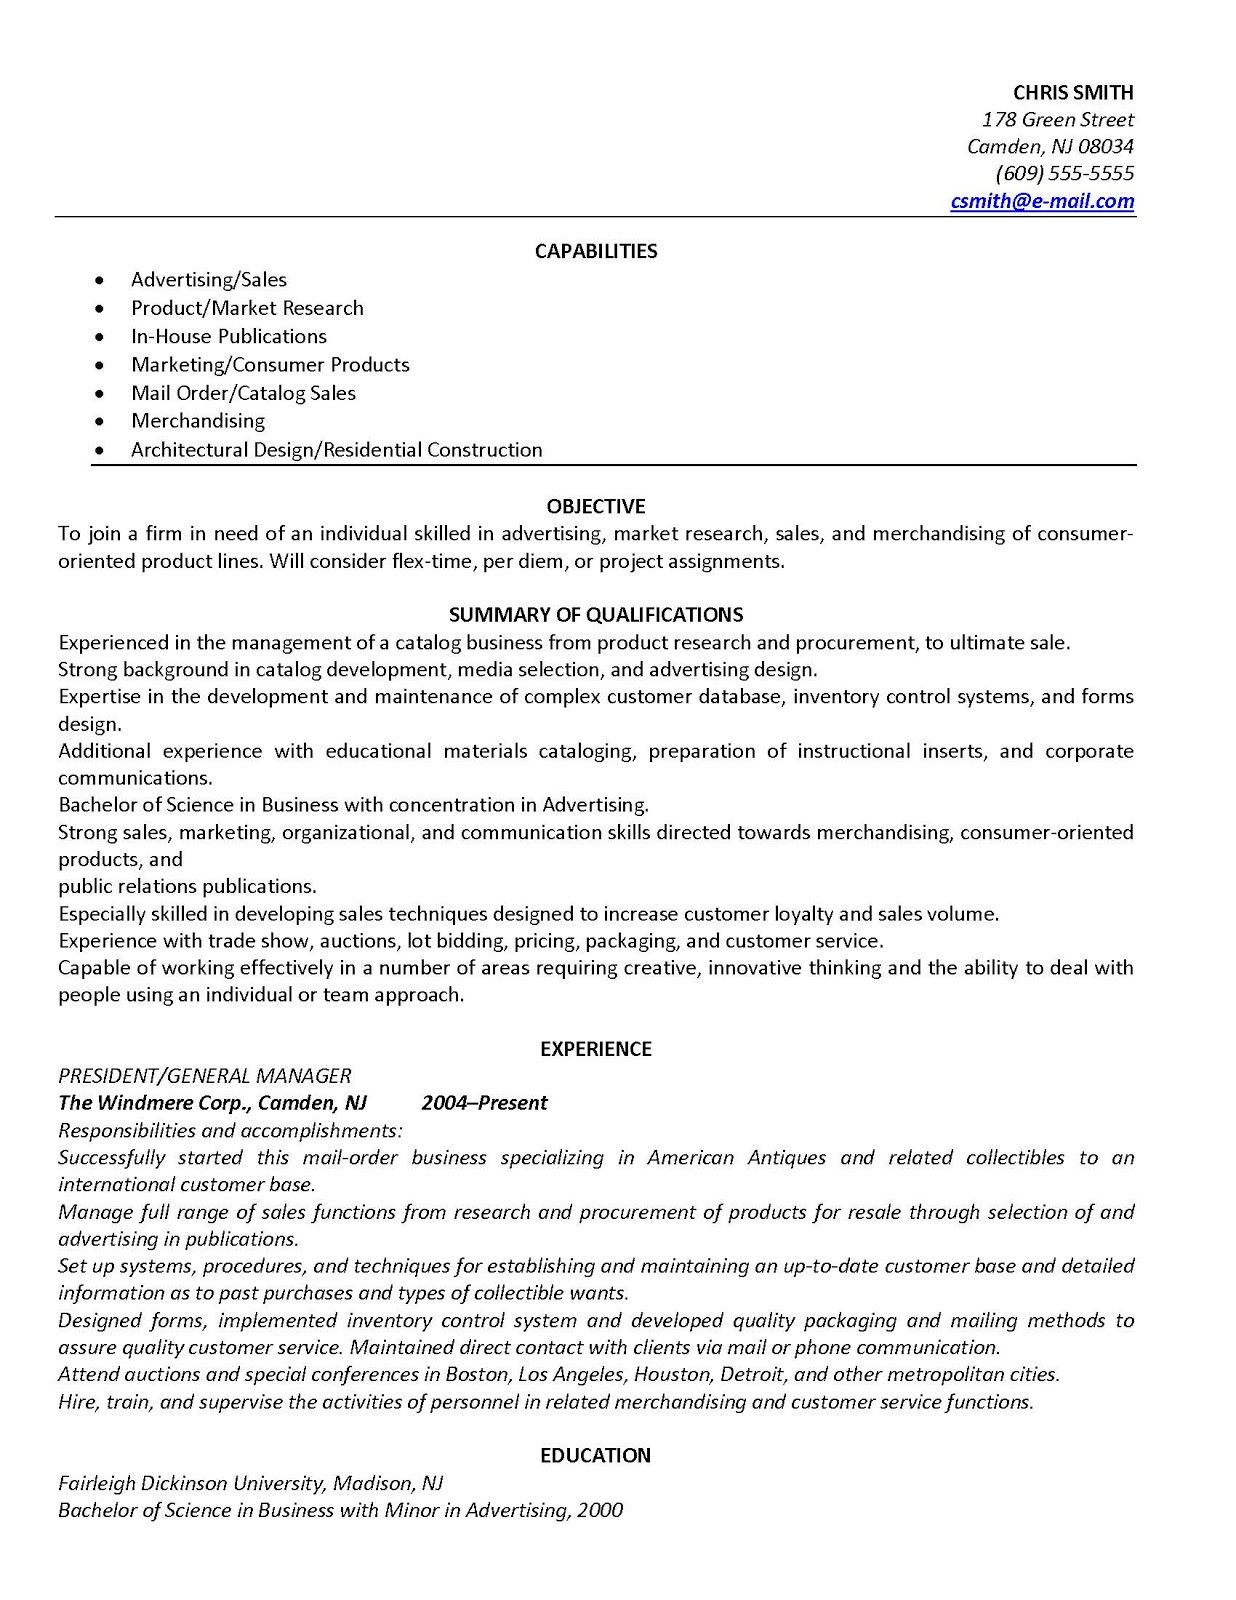 Example Of A Functional Resume Sample Best Functional Resumes for 2012